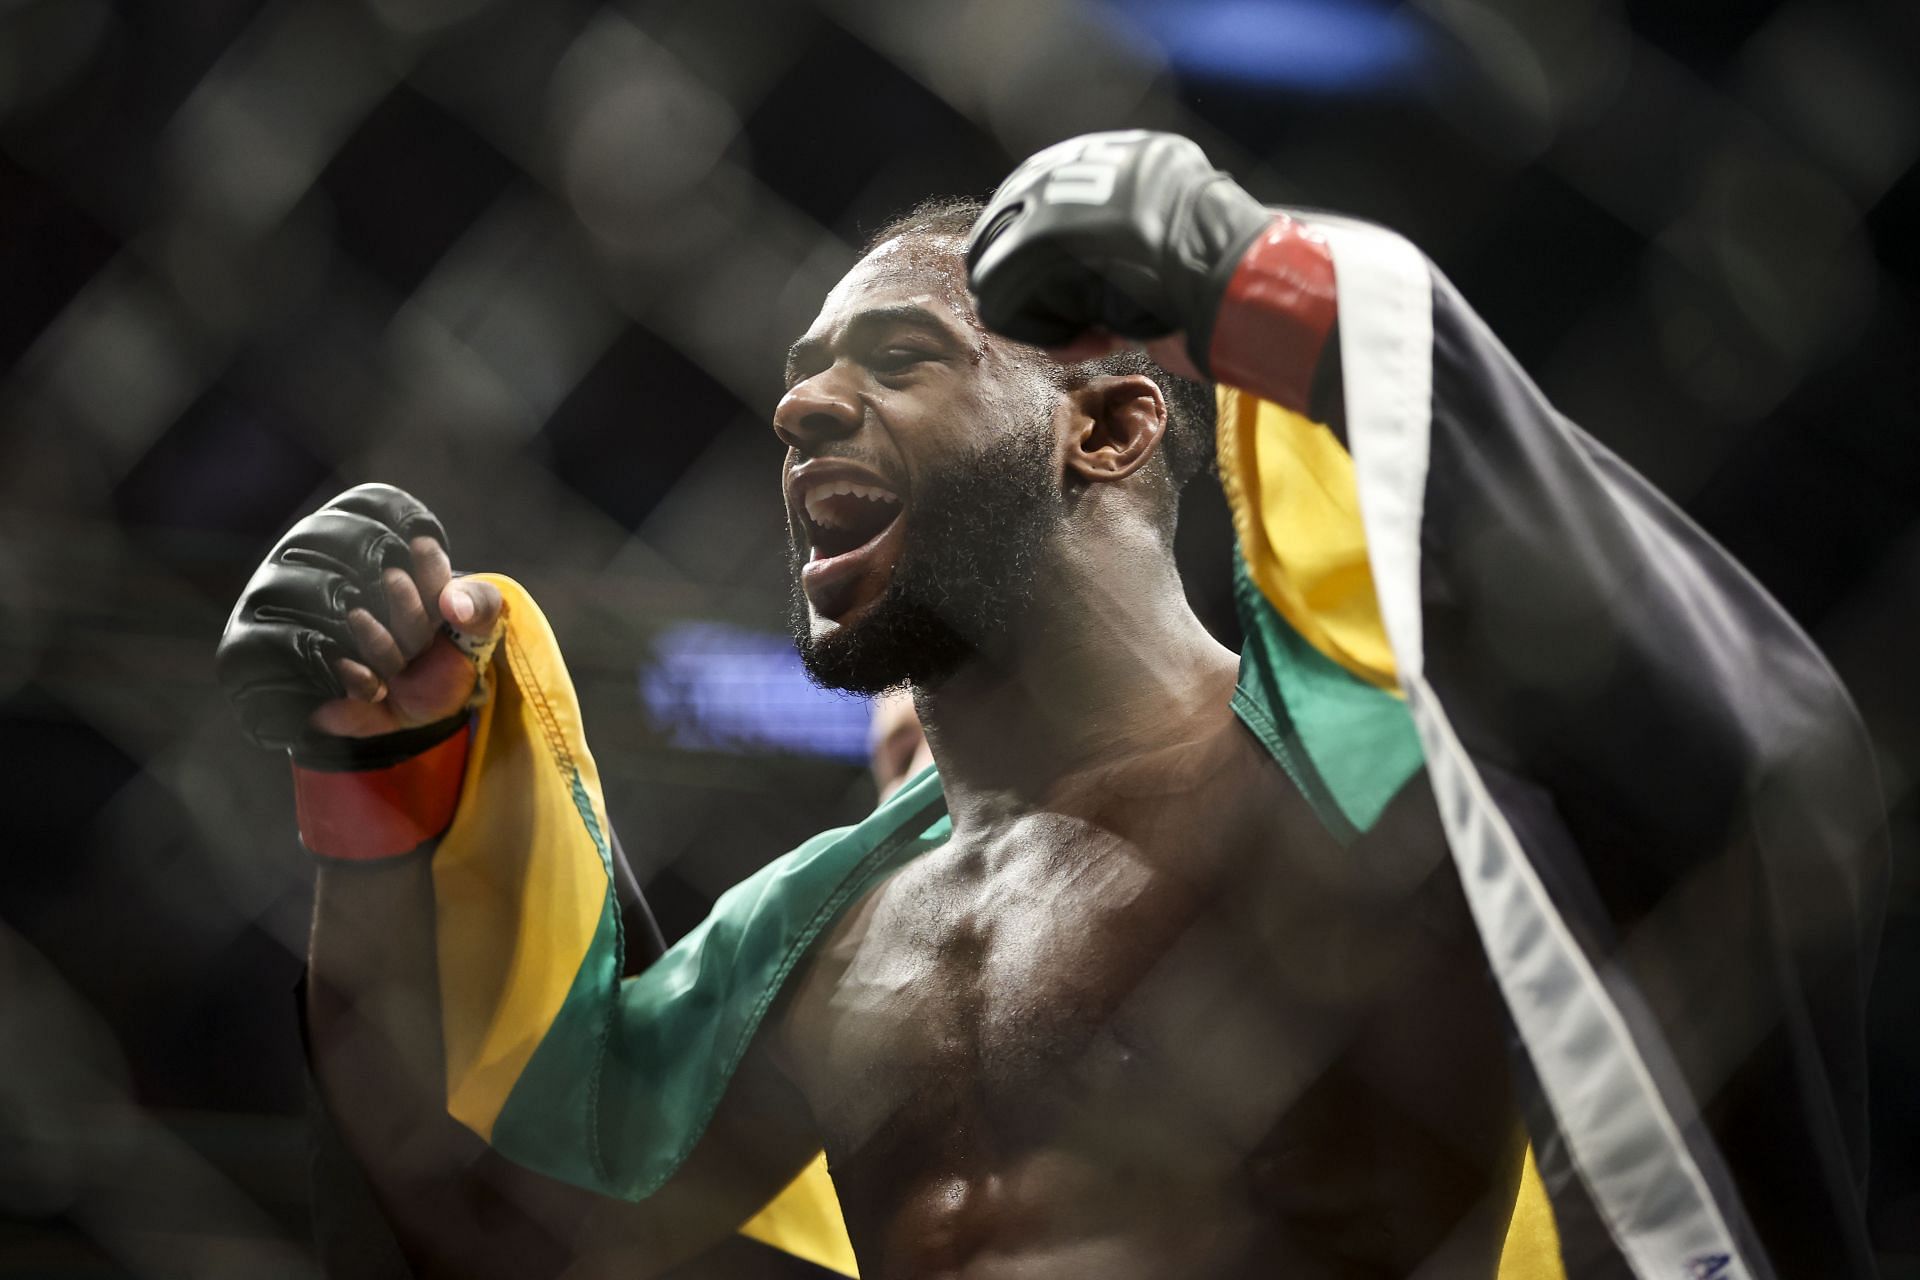 Aljamain Sterling was unfazed by fan criticism after his bantamweight title win in 2021